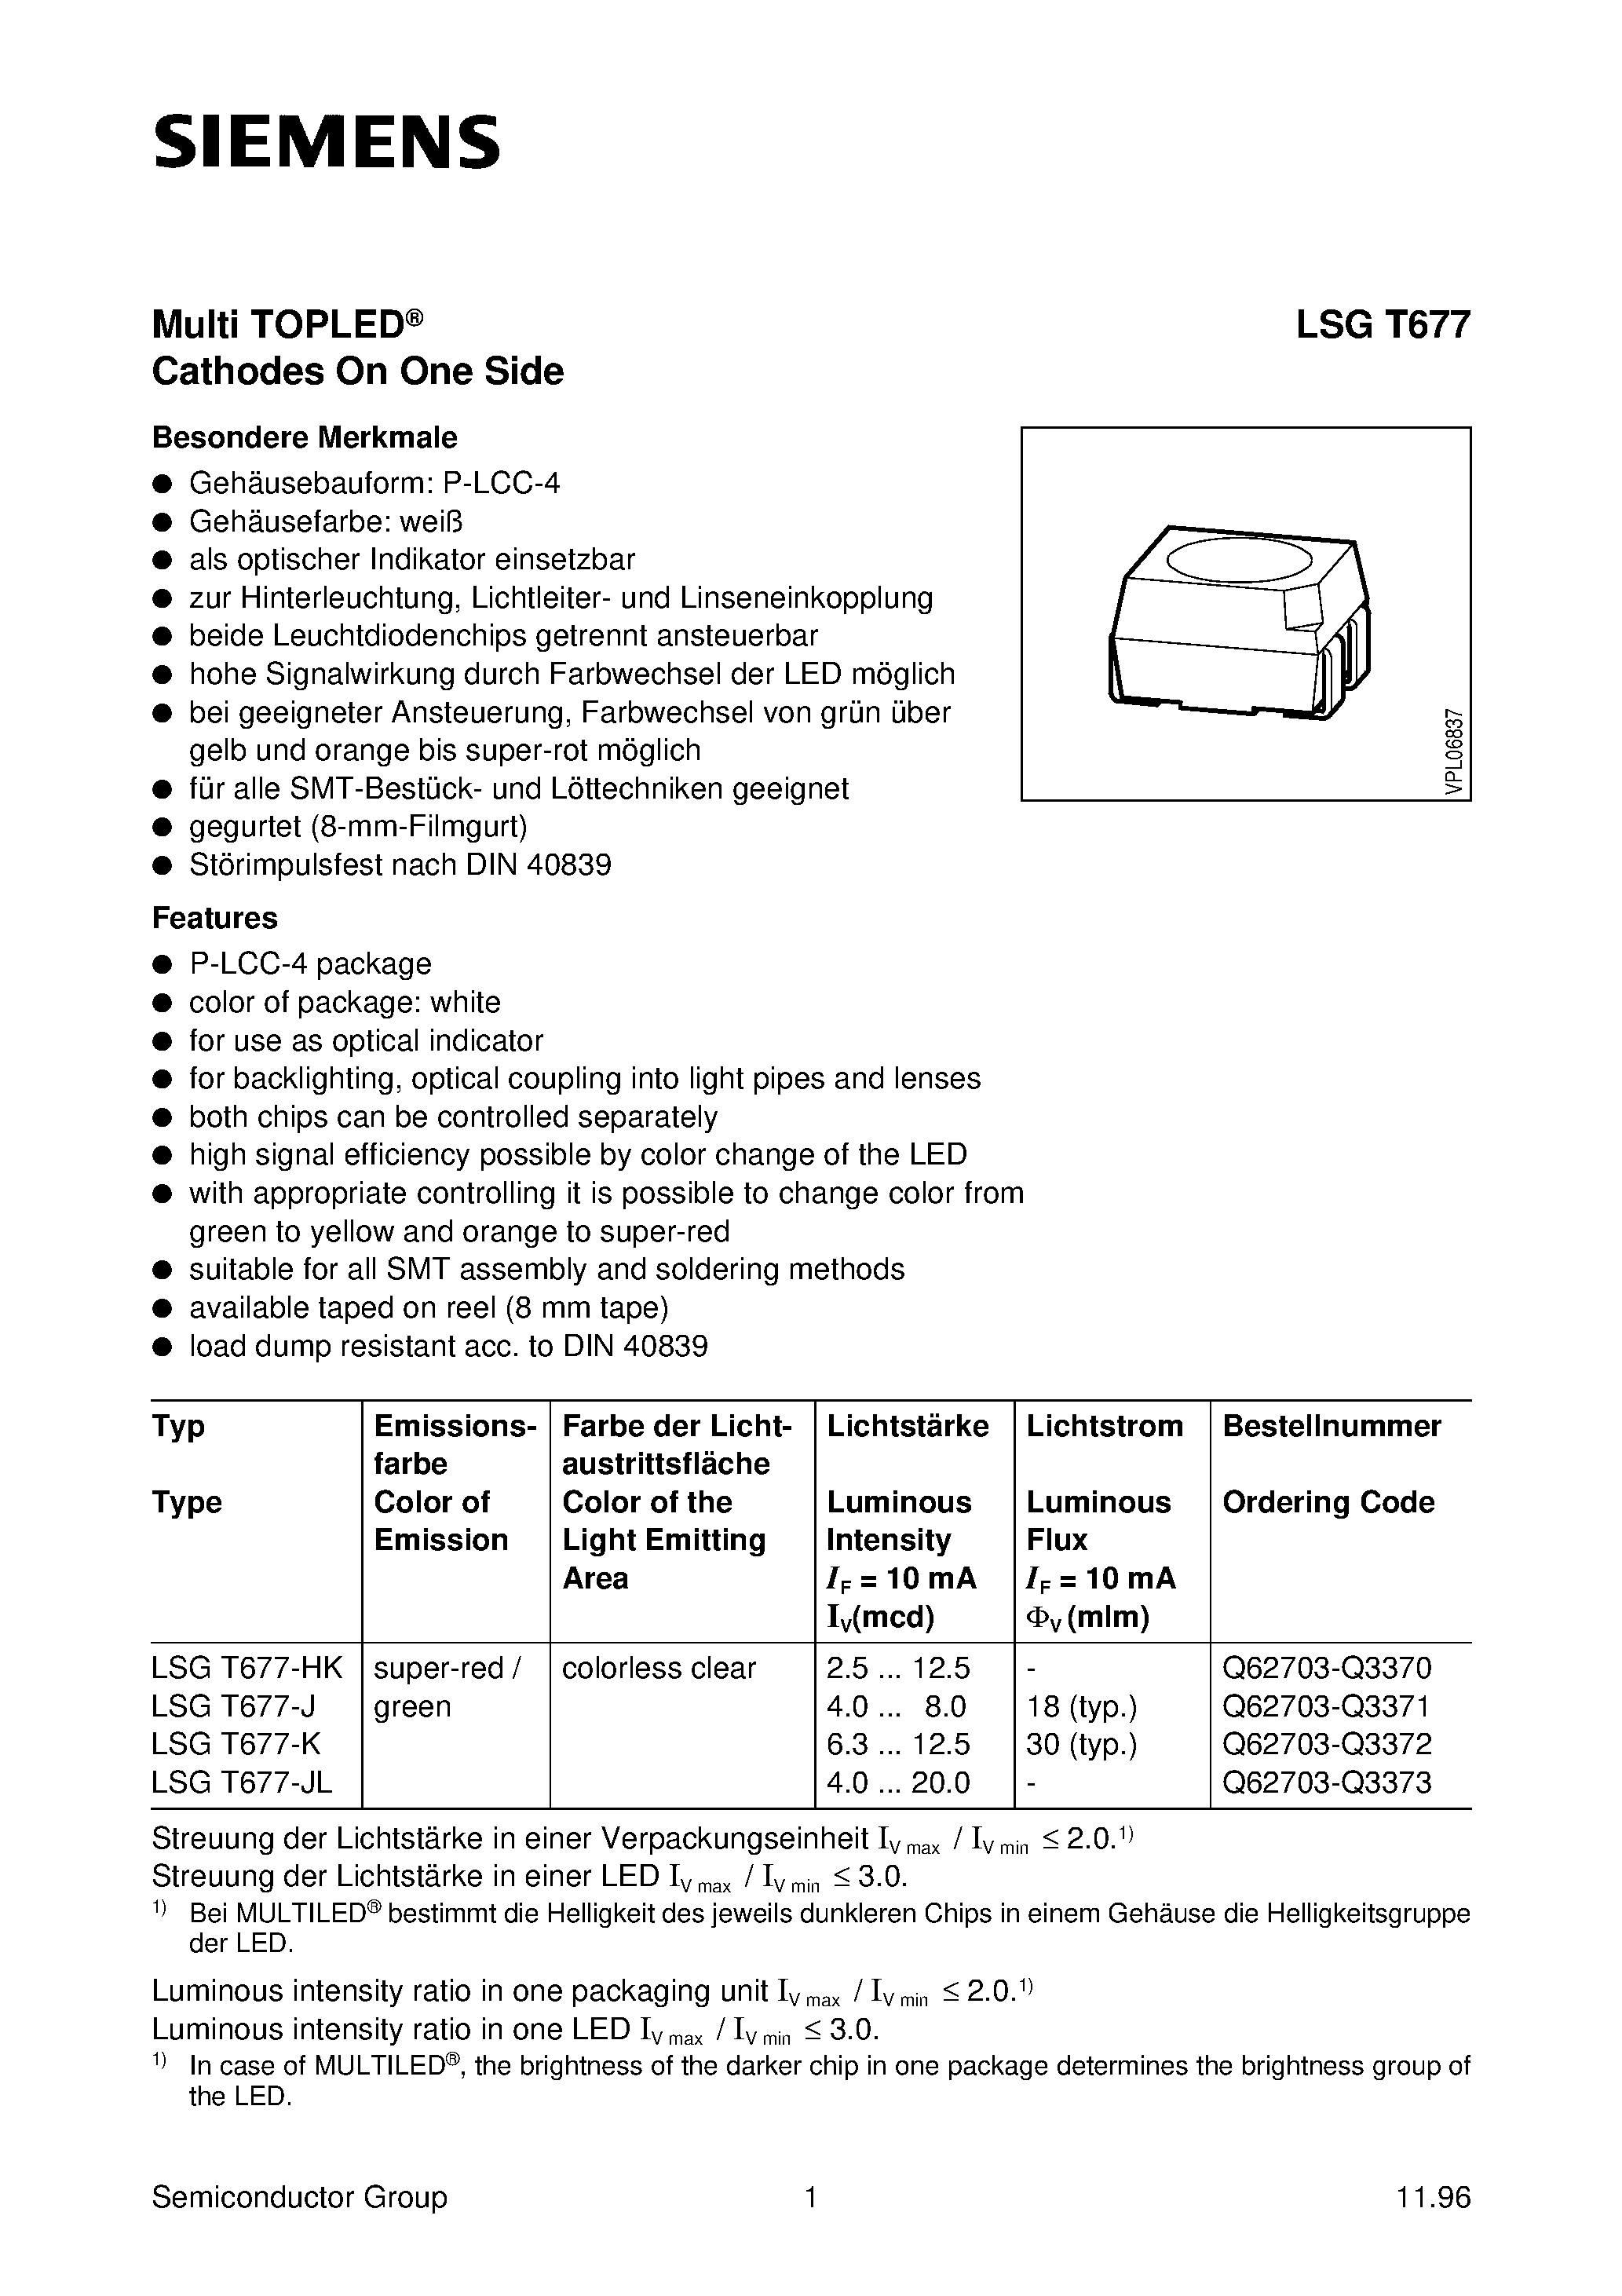 Datasheet LSGT677-K - Multi TOPLED Cathodes On One Side page 1